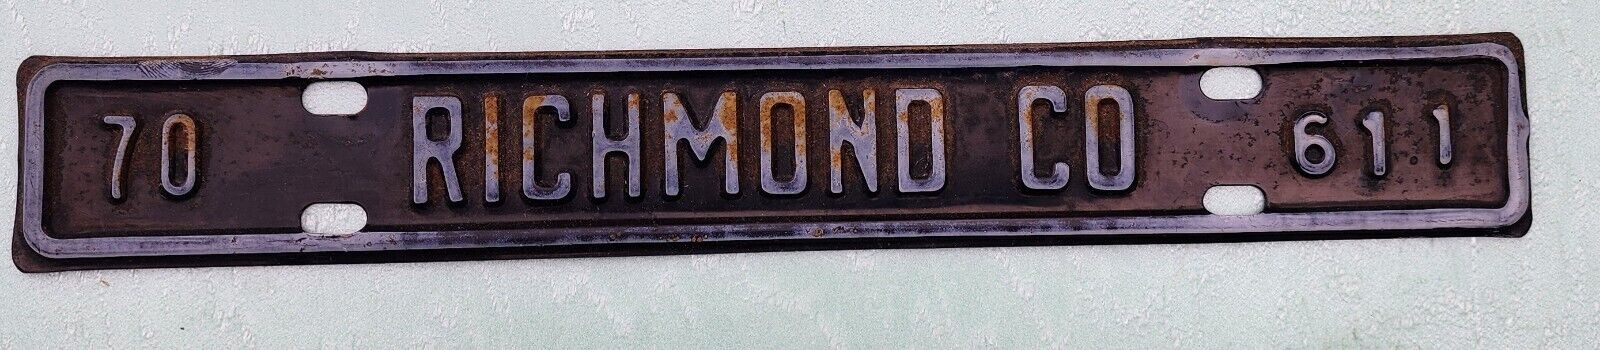 1970 Richmond County Virginia License Plate Town Tax Tag City Topper # 611